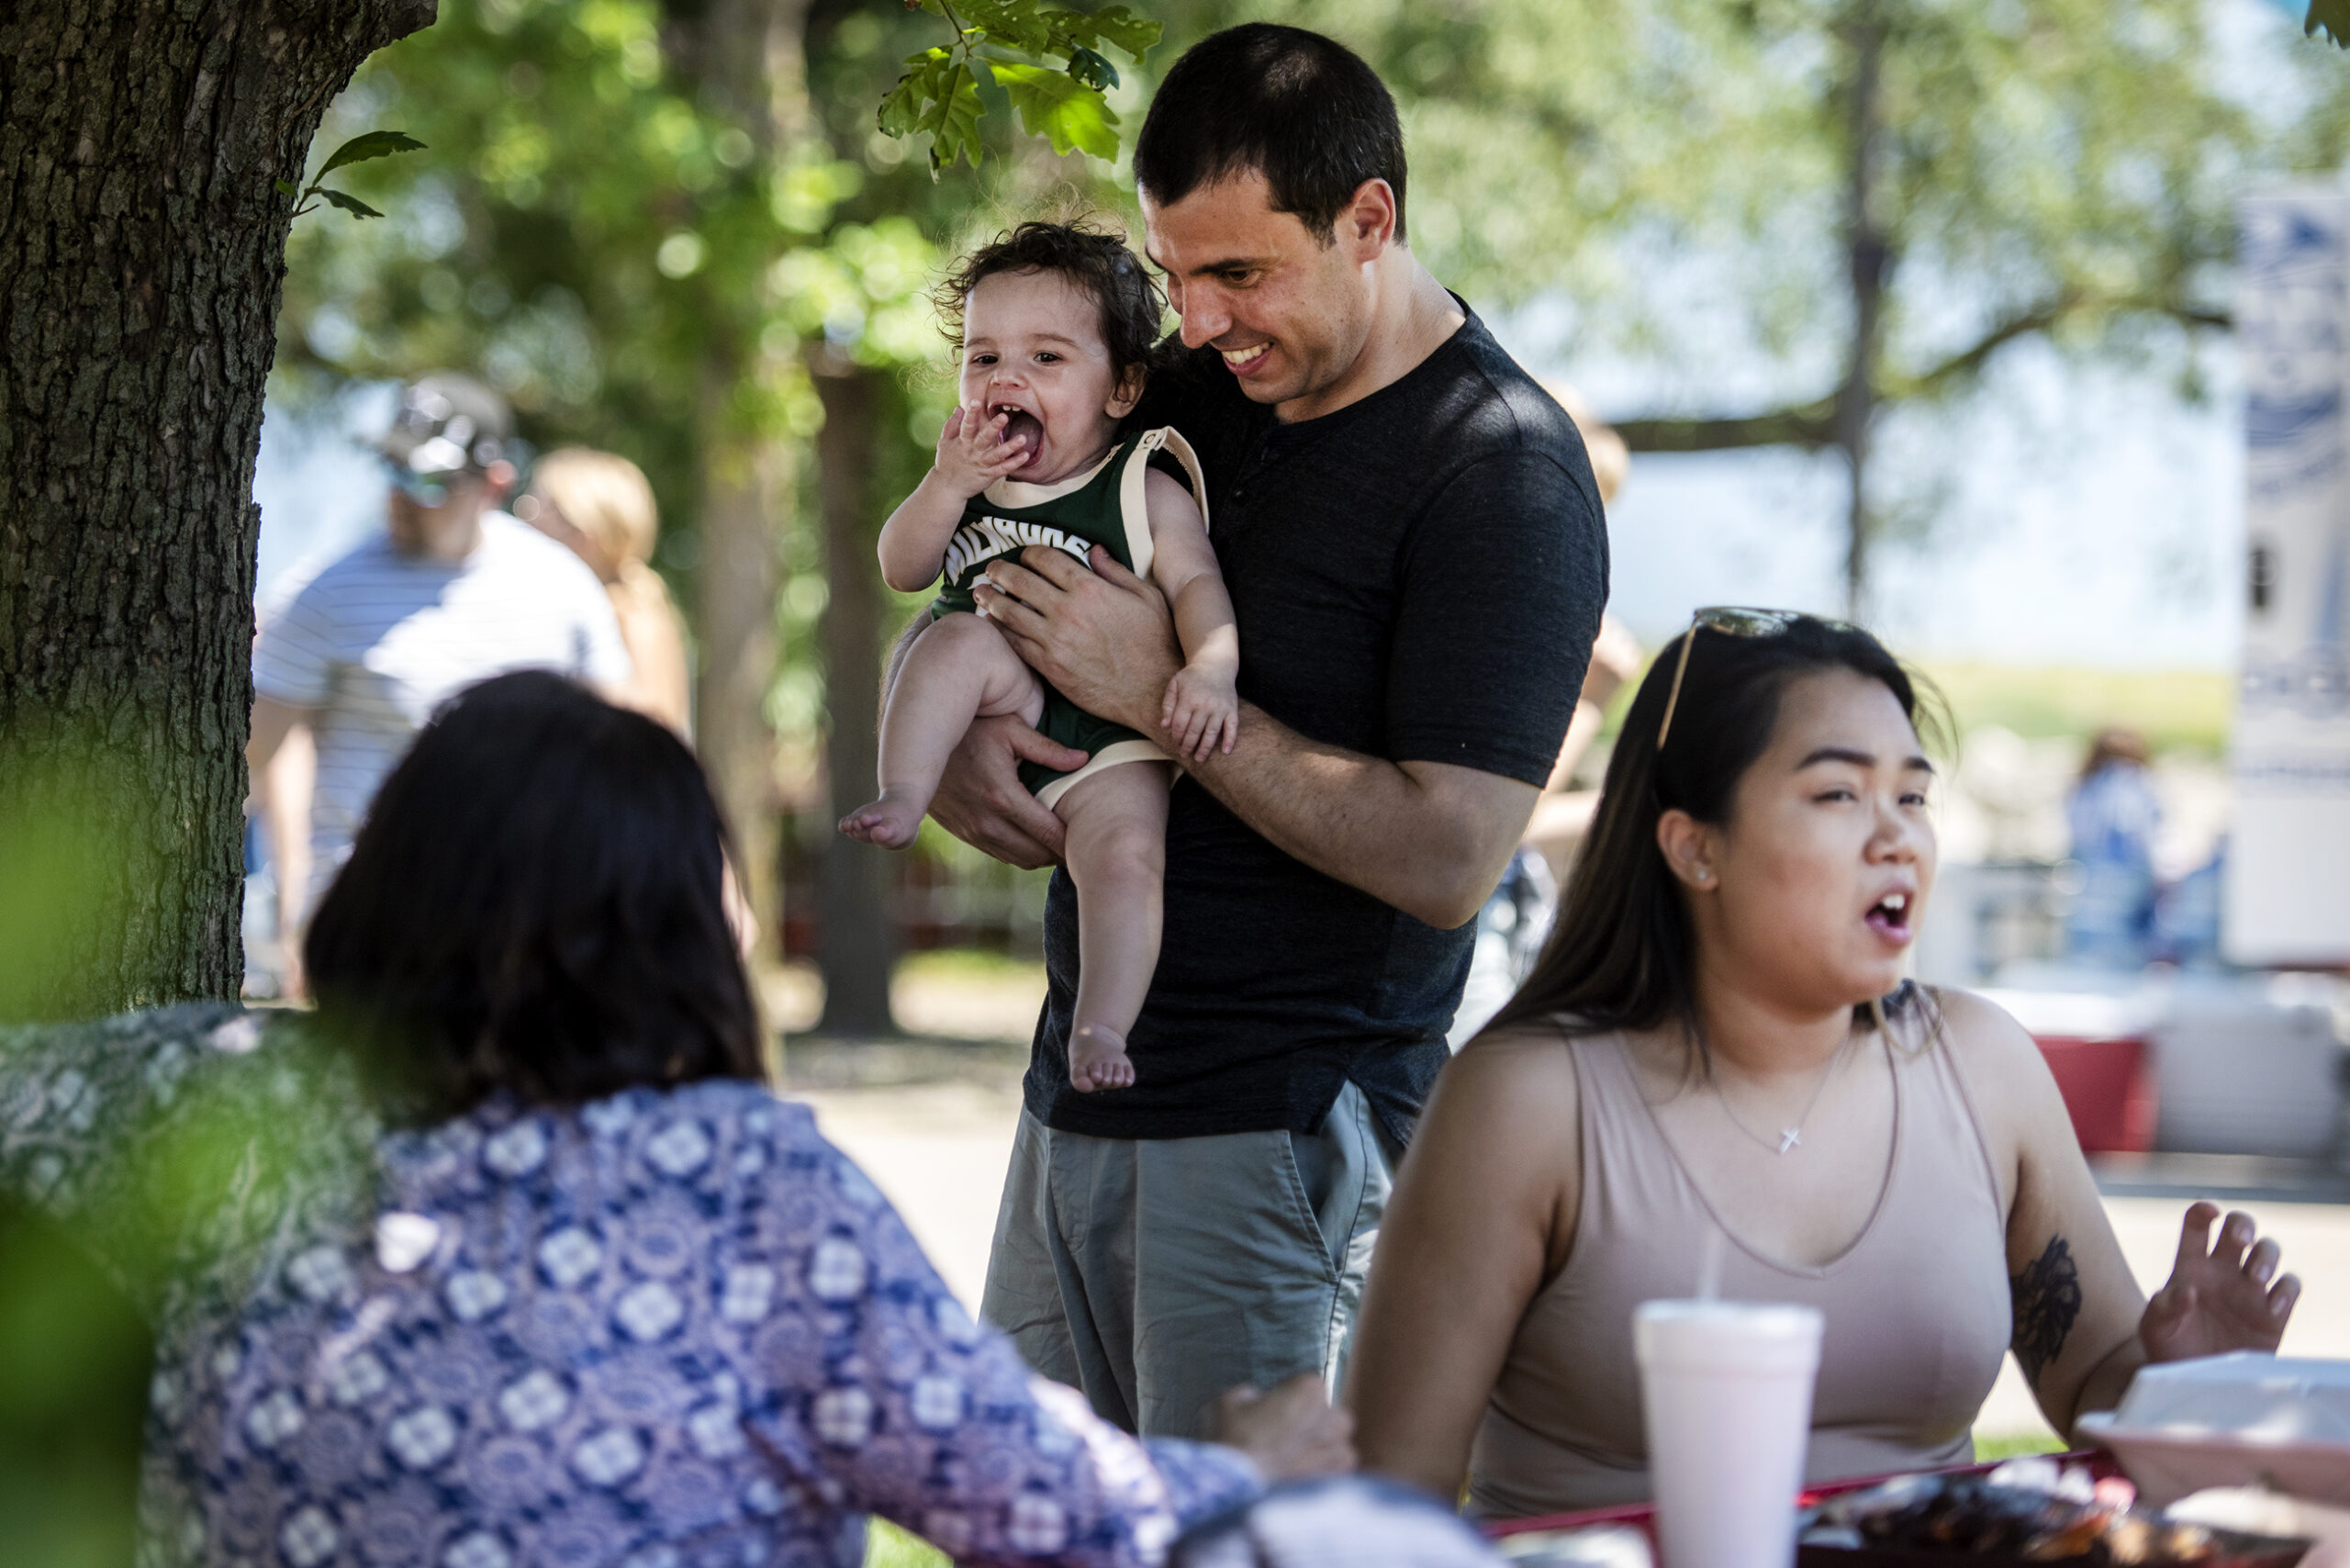 Alex Lasry holds his daughter as he speaks to people sitting at a picnic table.